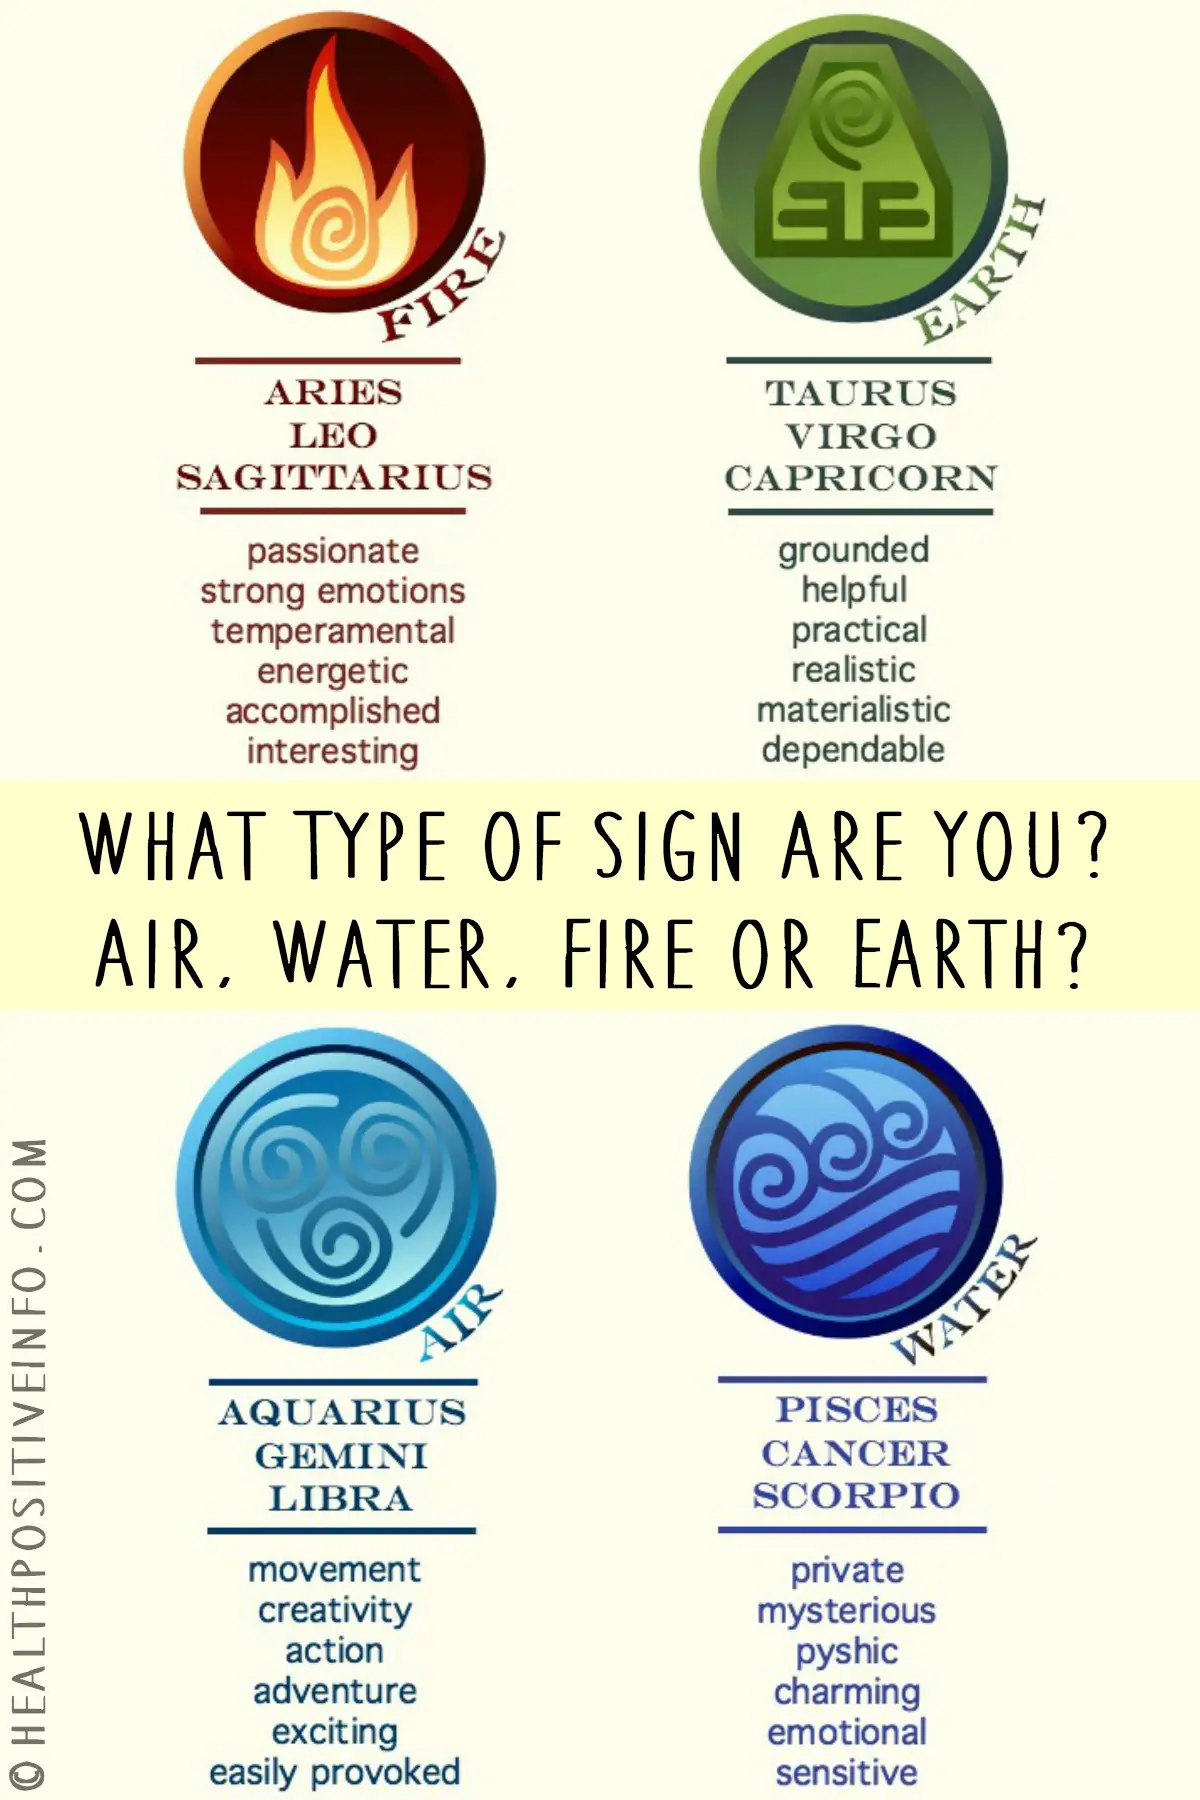 What Type of Sign Are You? Air, Water, Fire or Earth?